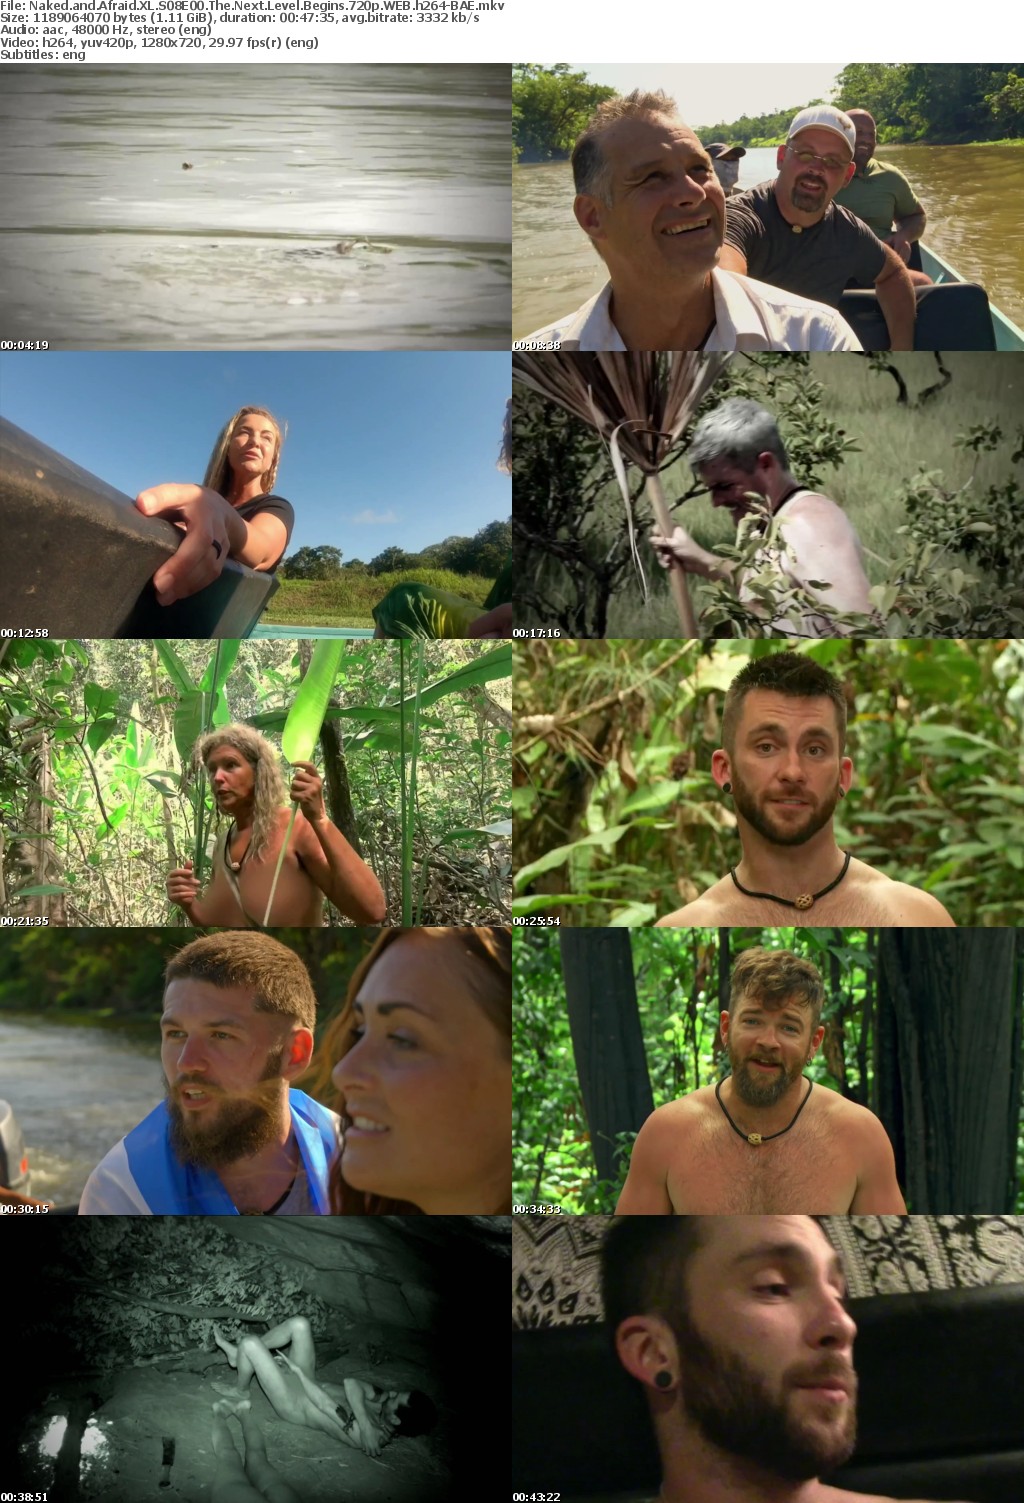 Naked and Afraid XL S08E00 The Next Level Begins 720p WEB h264-BAE